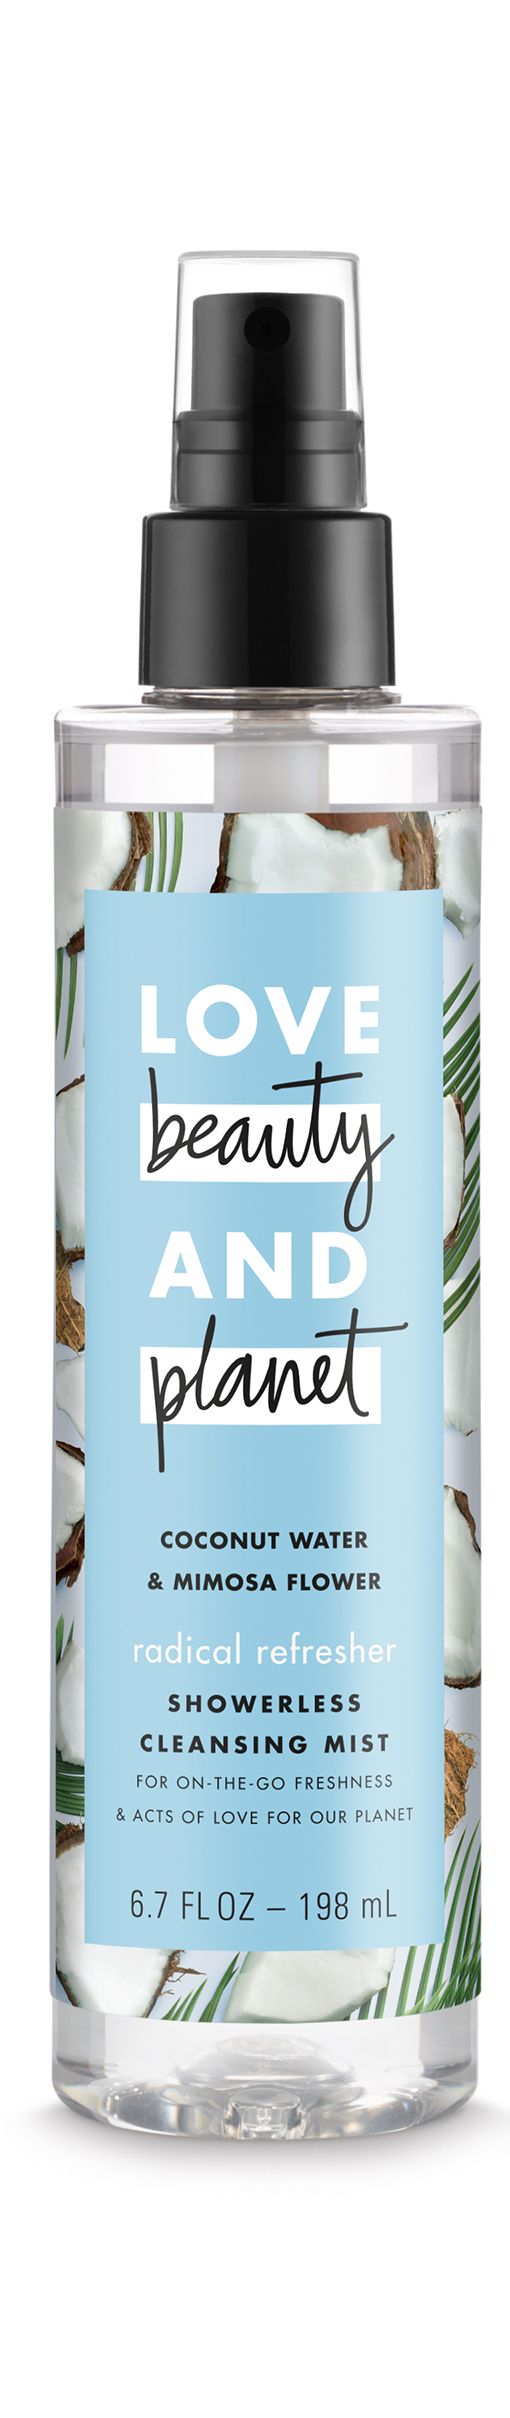 Love Beauty and Planet Coconut Water & Mimosa Flower Showerless Cleansing Mist